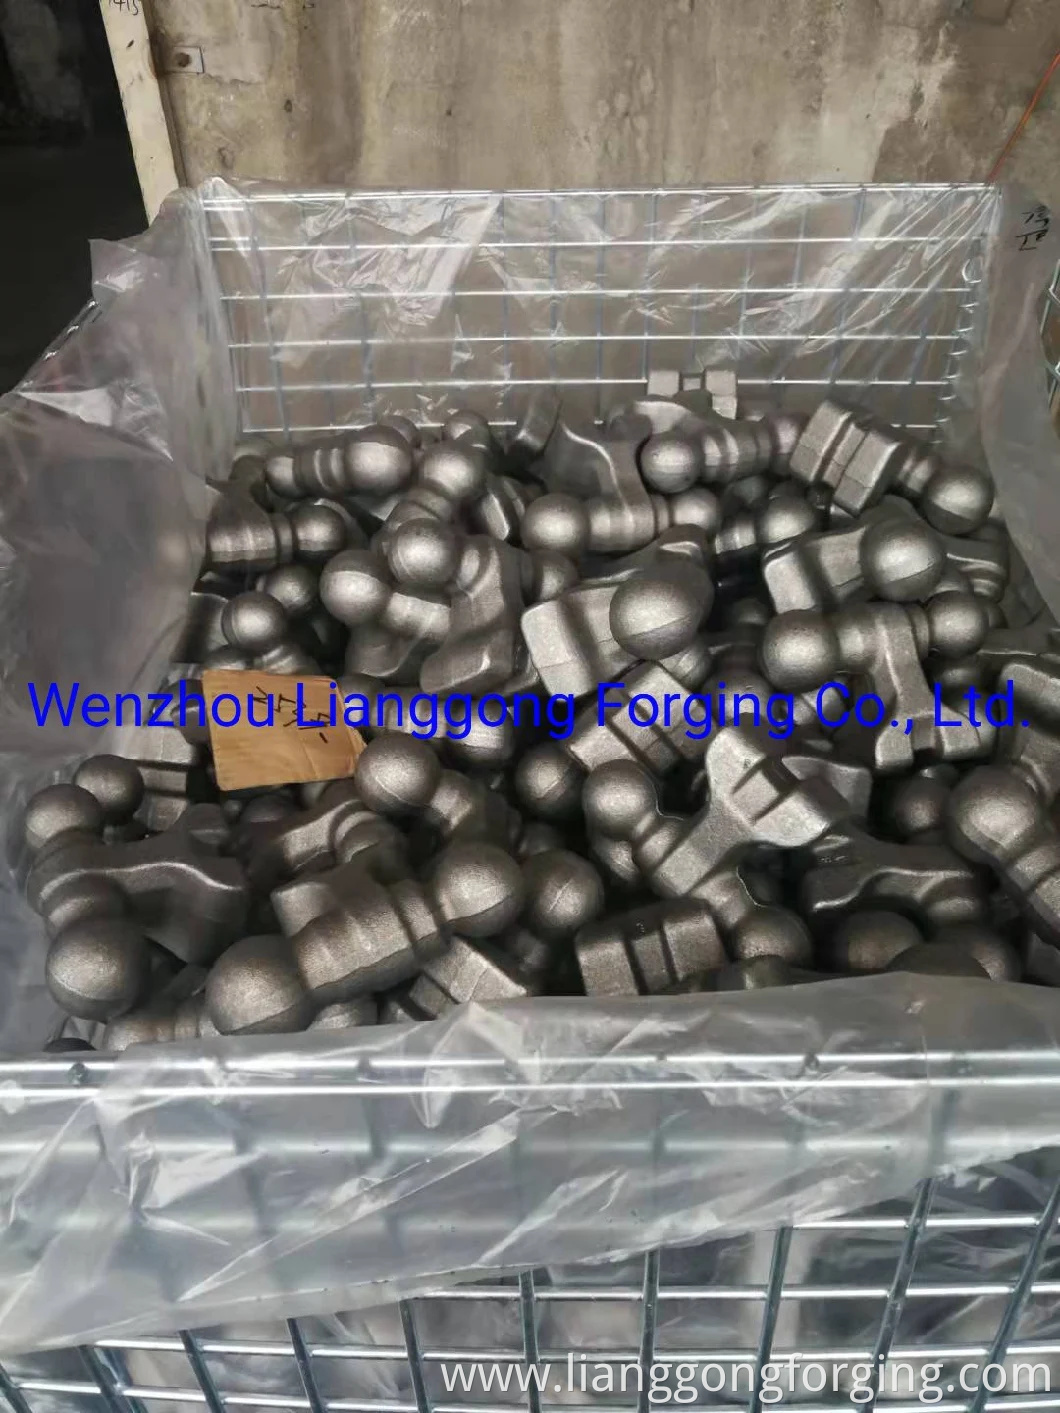 Customized Trailer Spare Part with Hot Forging Process